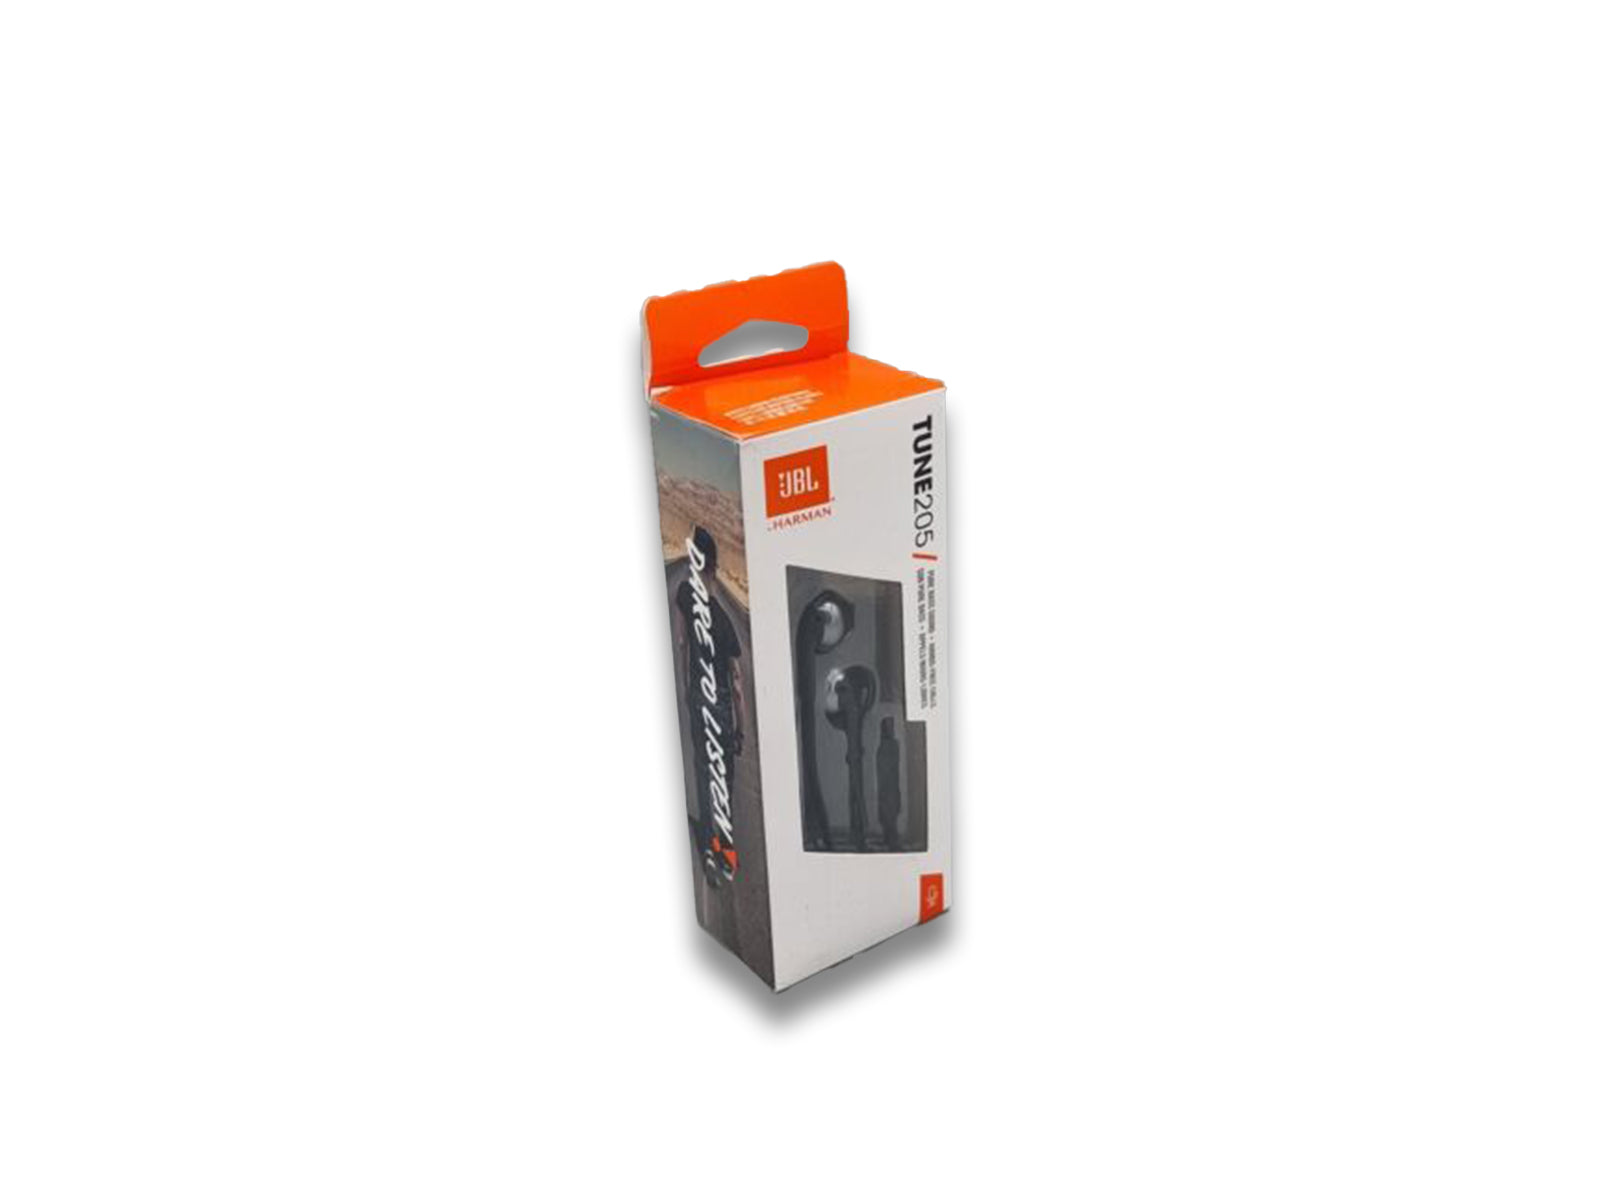 Image shows side view of packaging for jbl speakers on white background